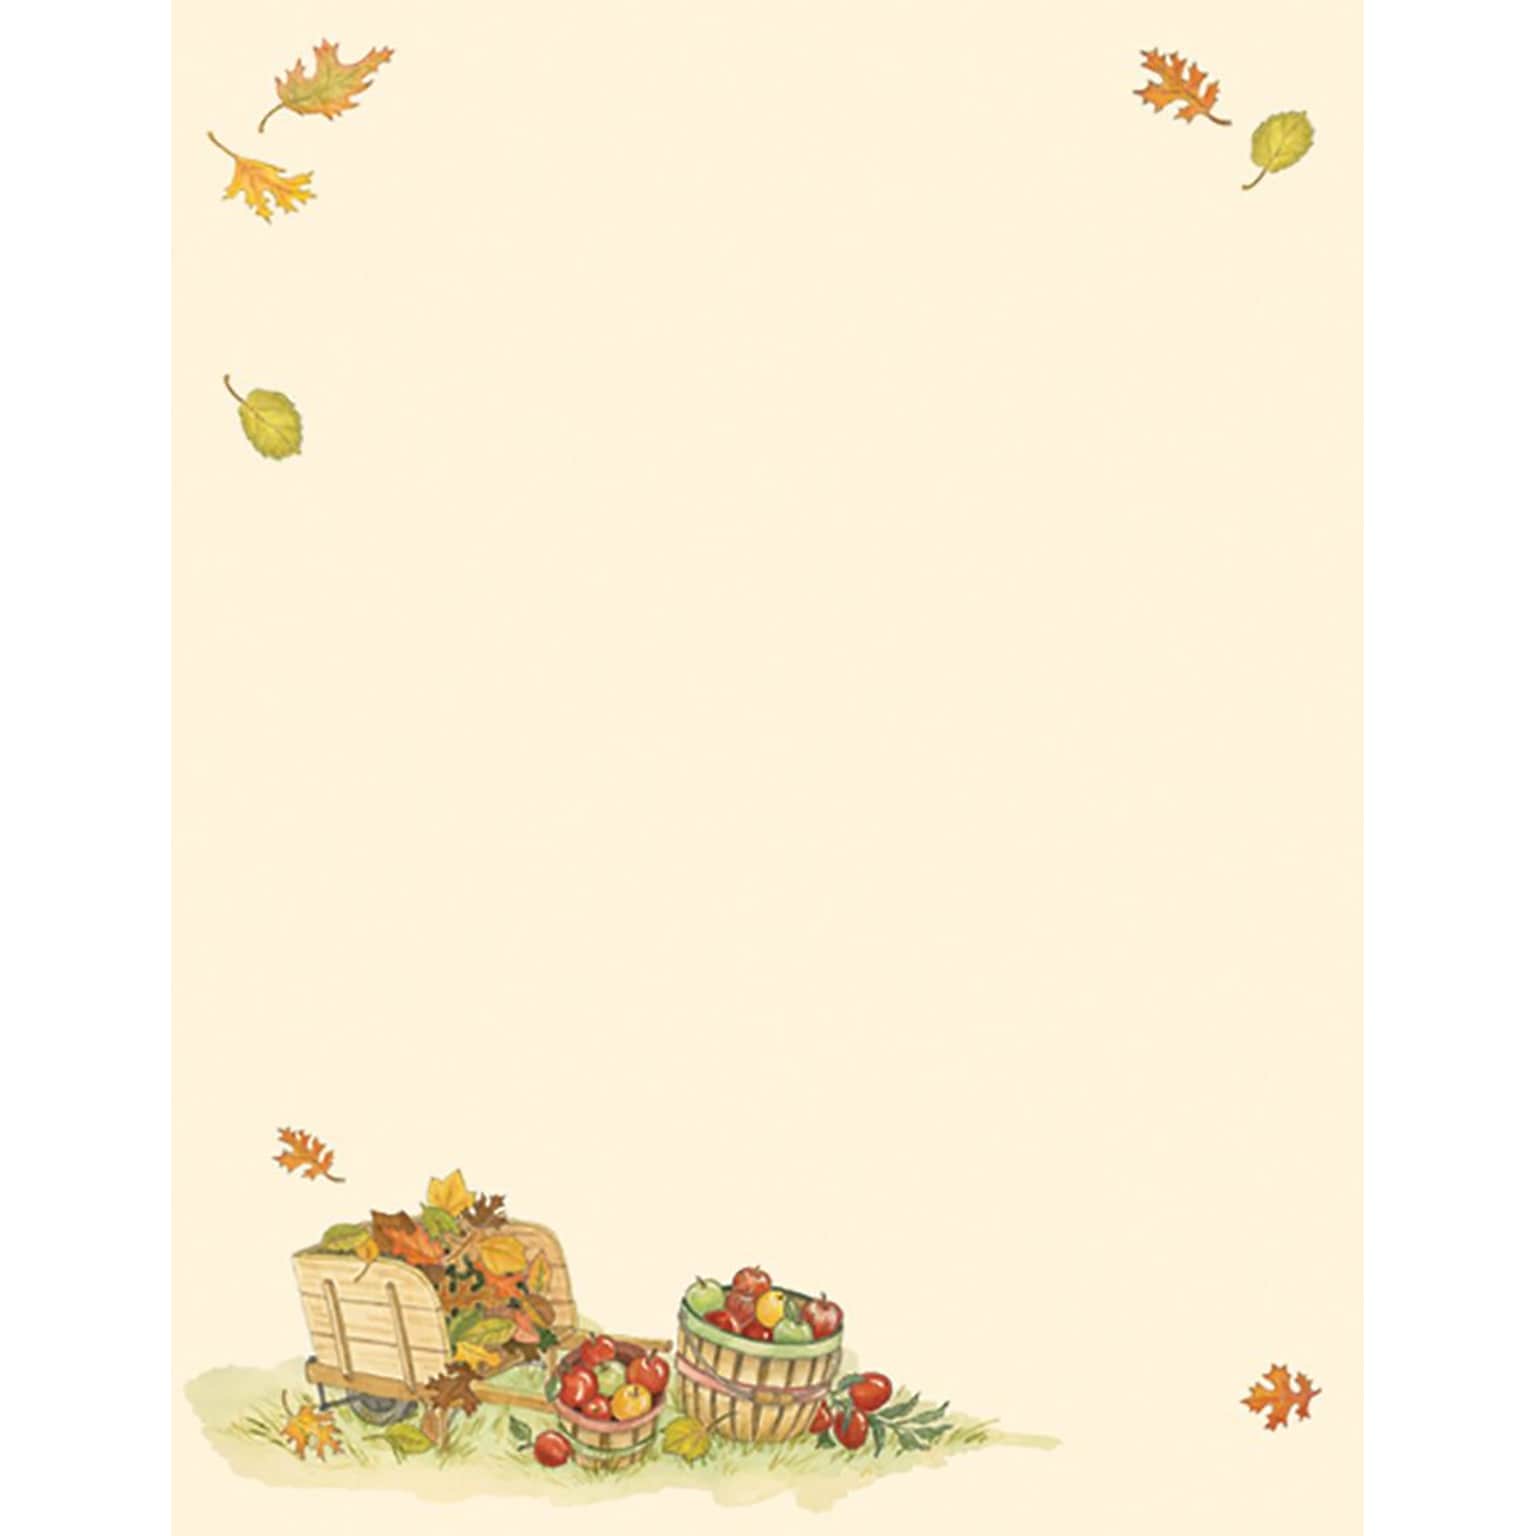 Great Papers® Holiday Stationery, Harvest Apples, 80/Count (2014325)